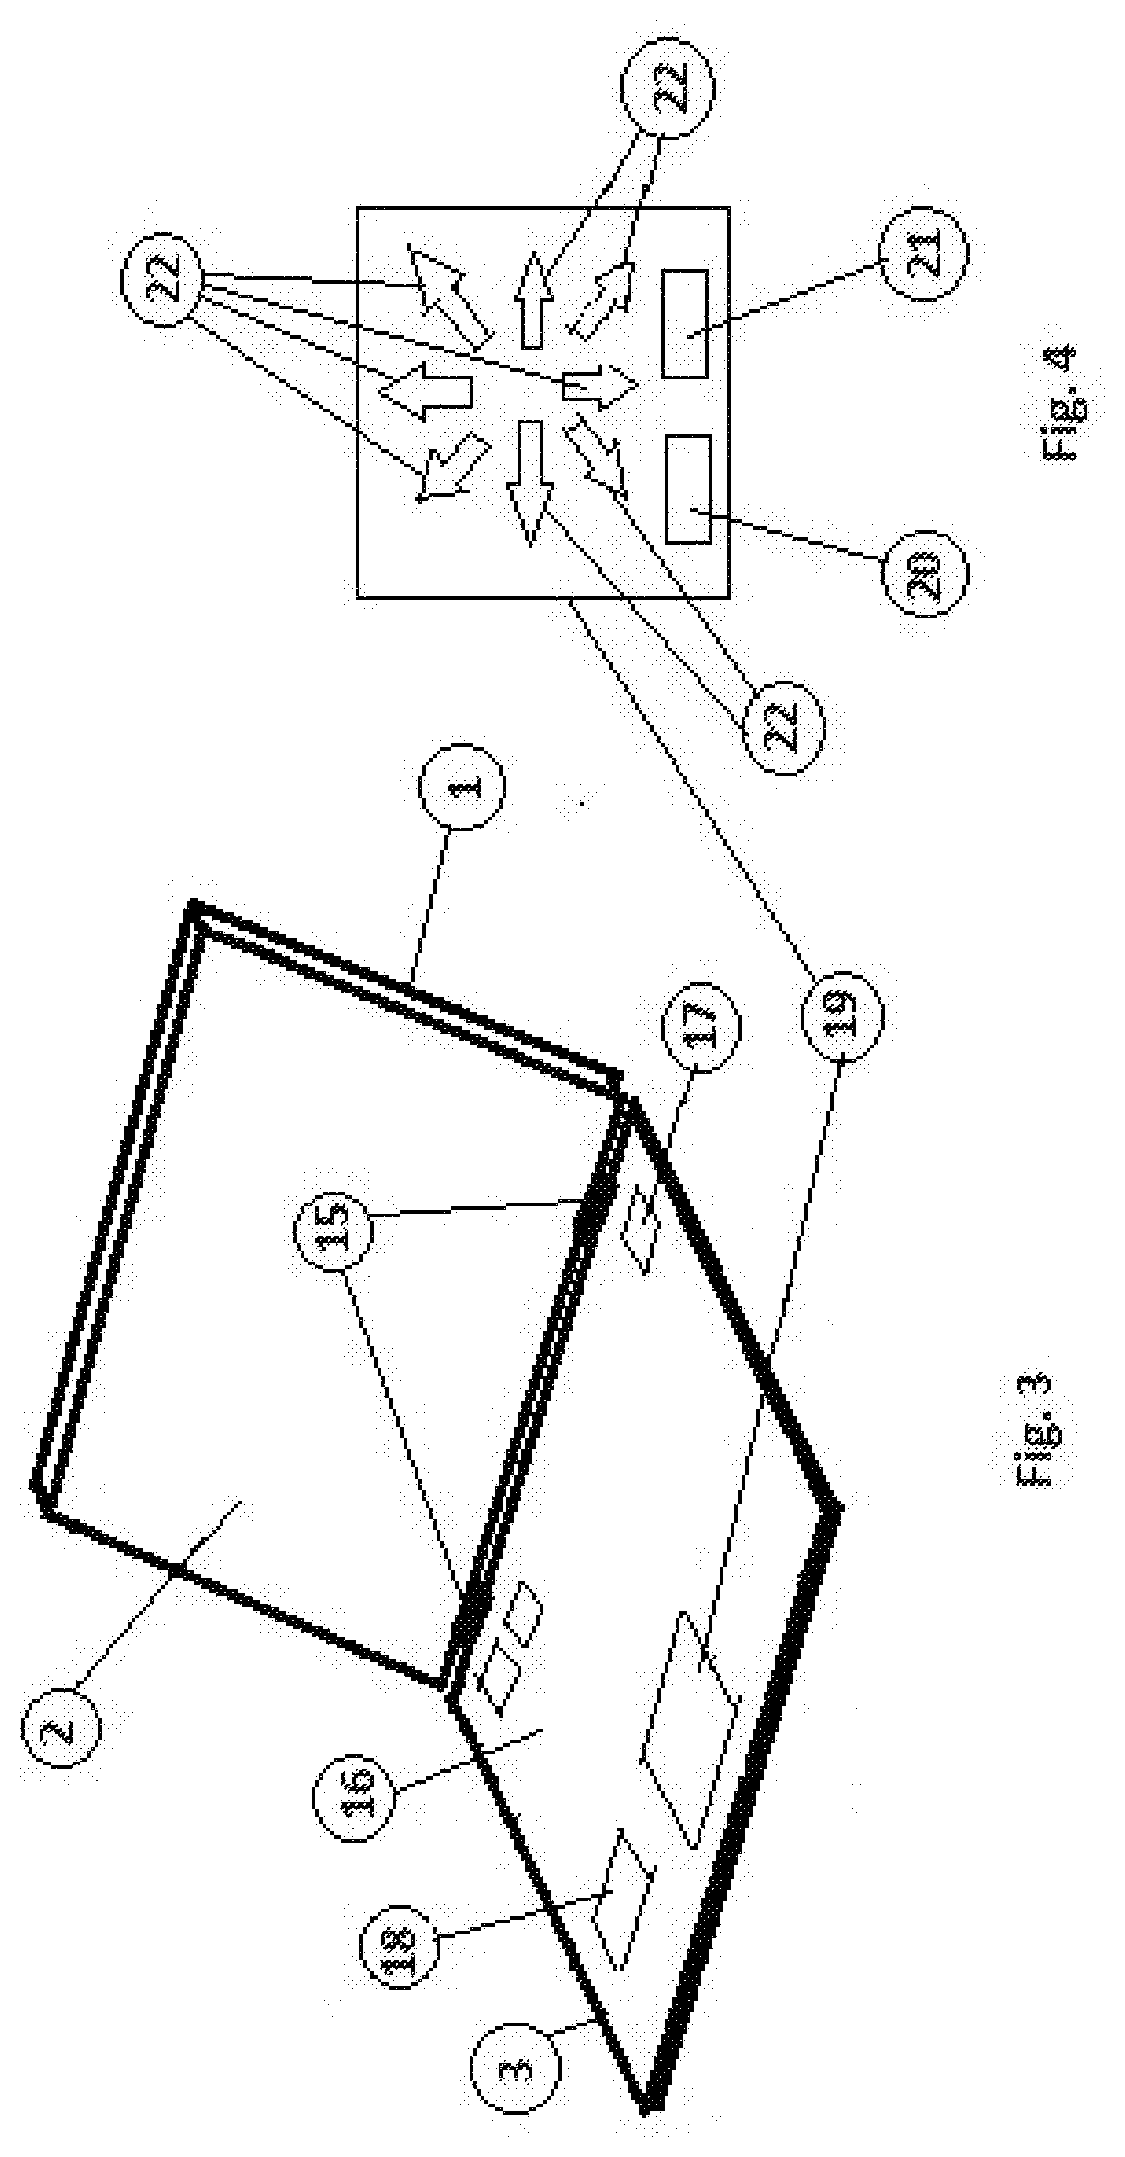 Electronic devices with dual display screens